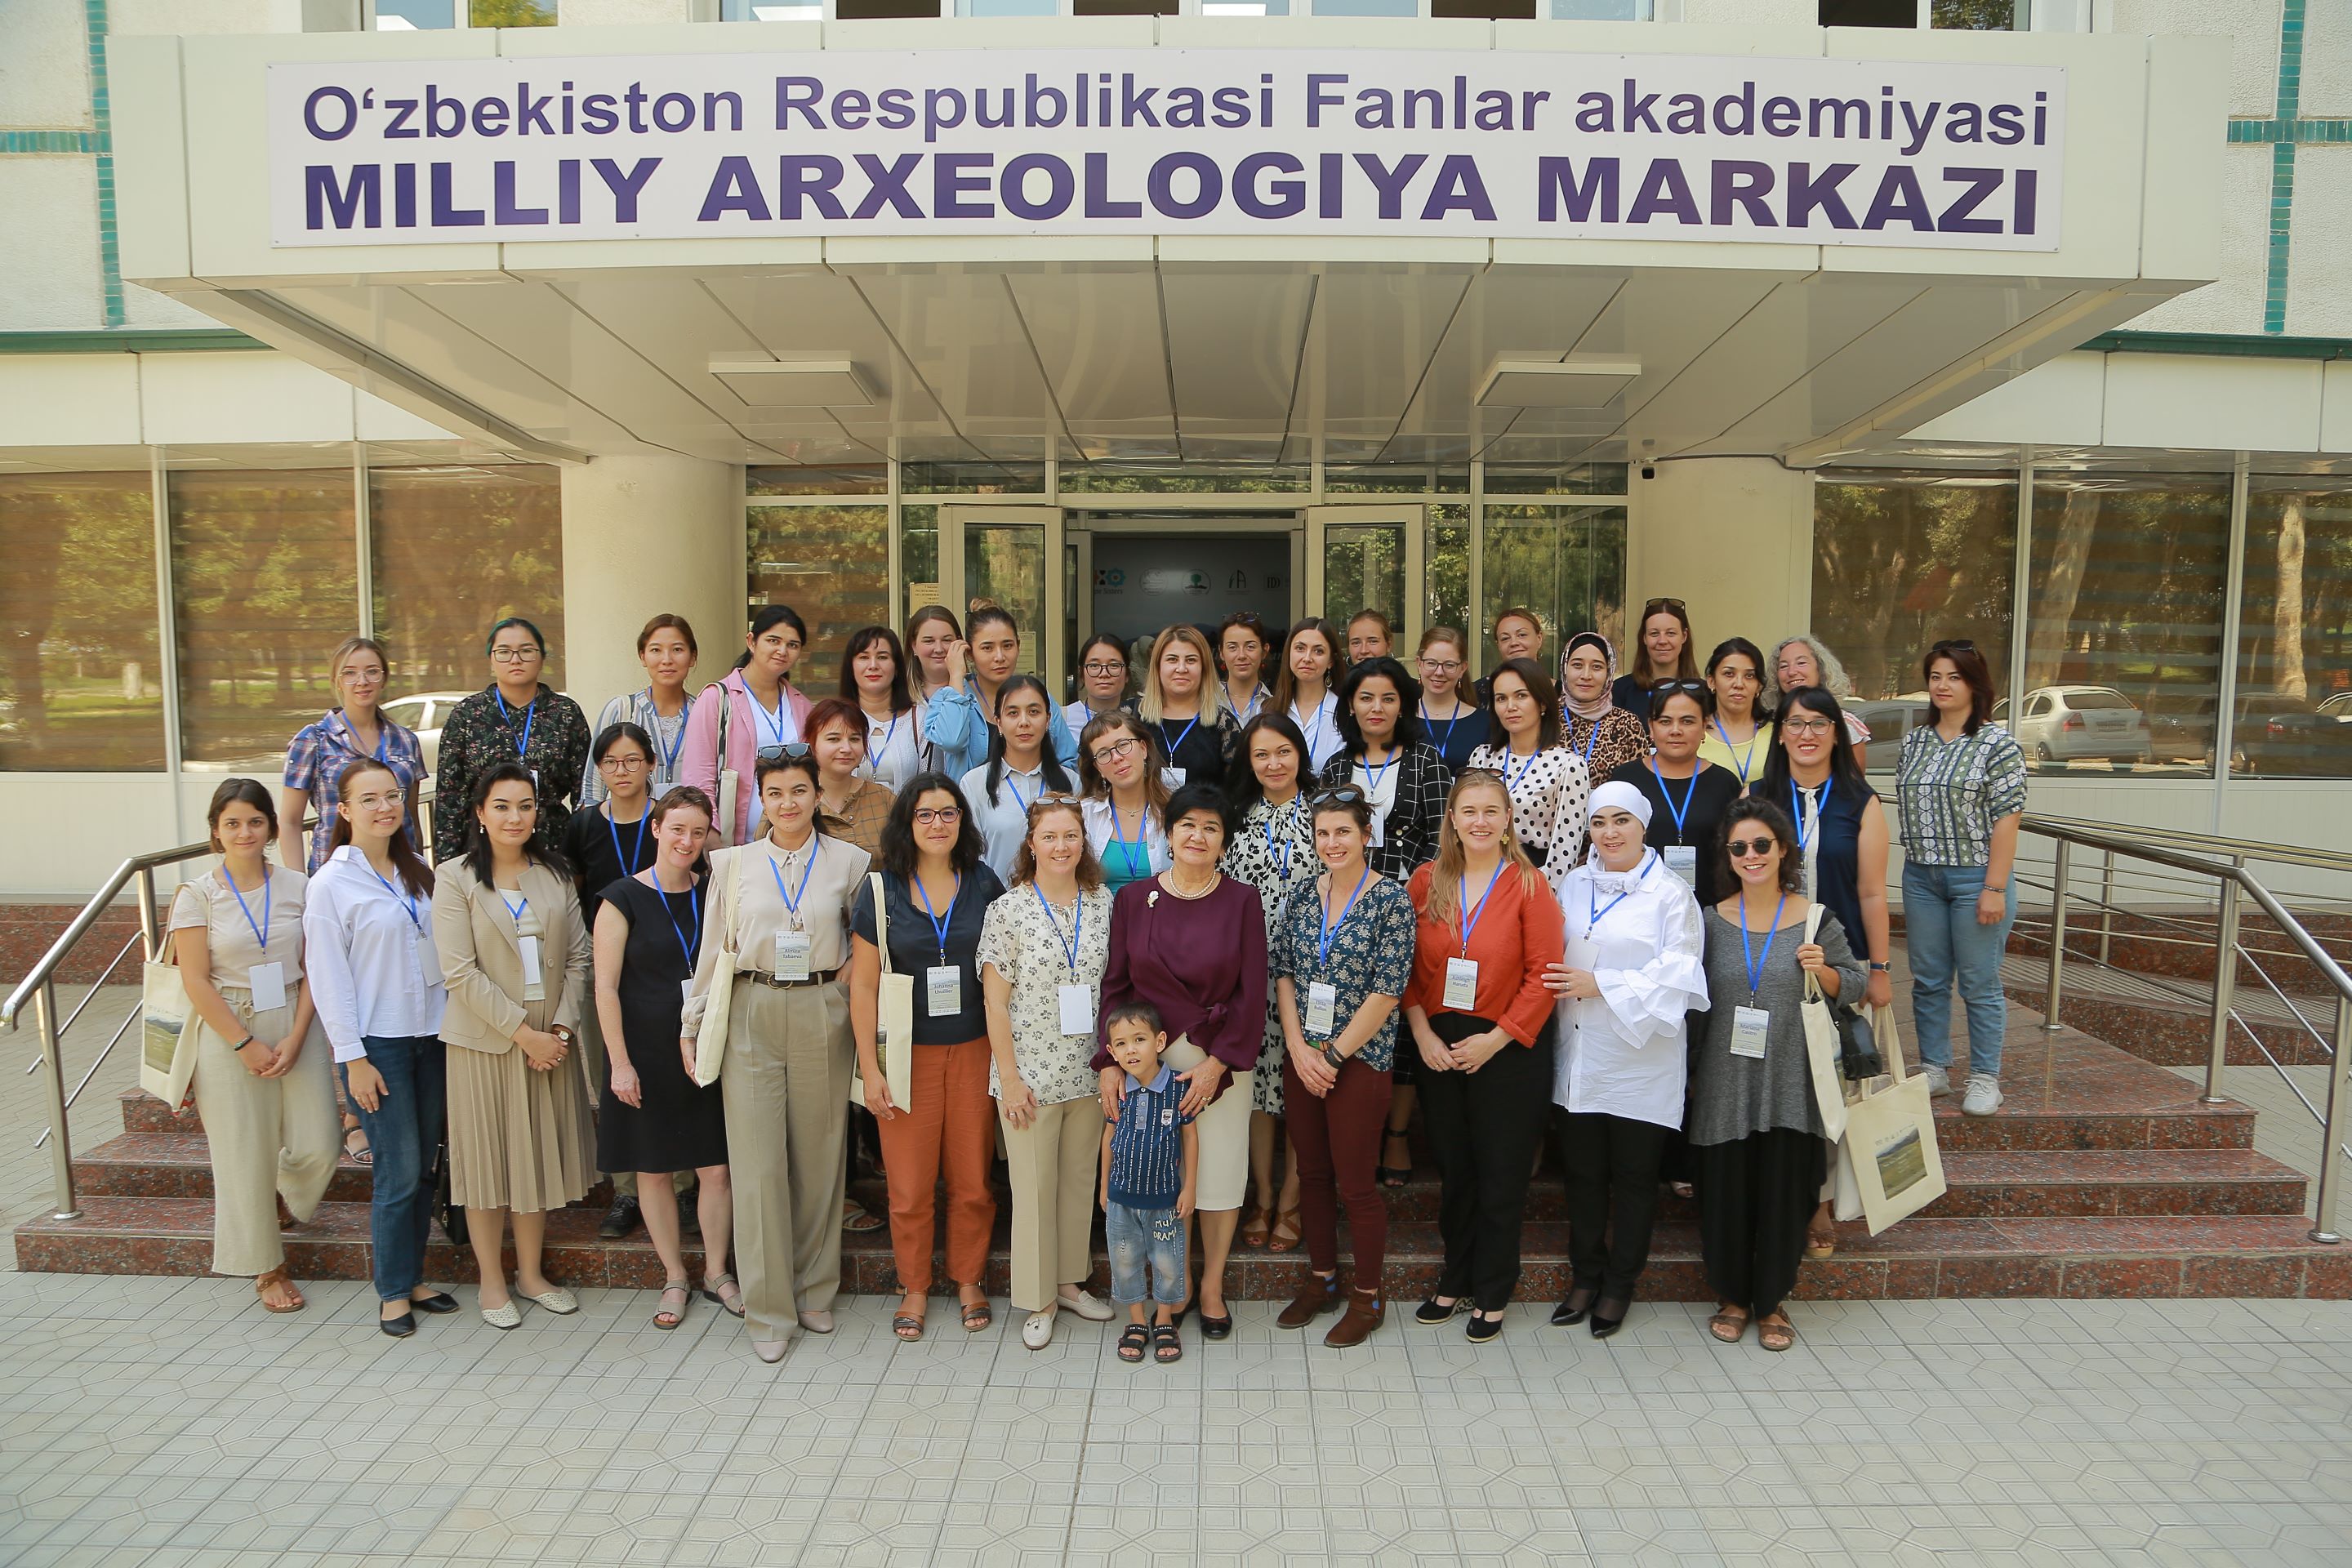 Group photo in front of some steps outside a building, showing attendees at the first Steppe Sisters Early Career Conference in Tashkent in September 2022